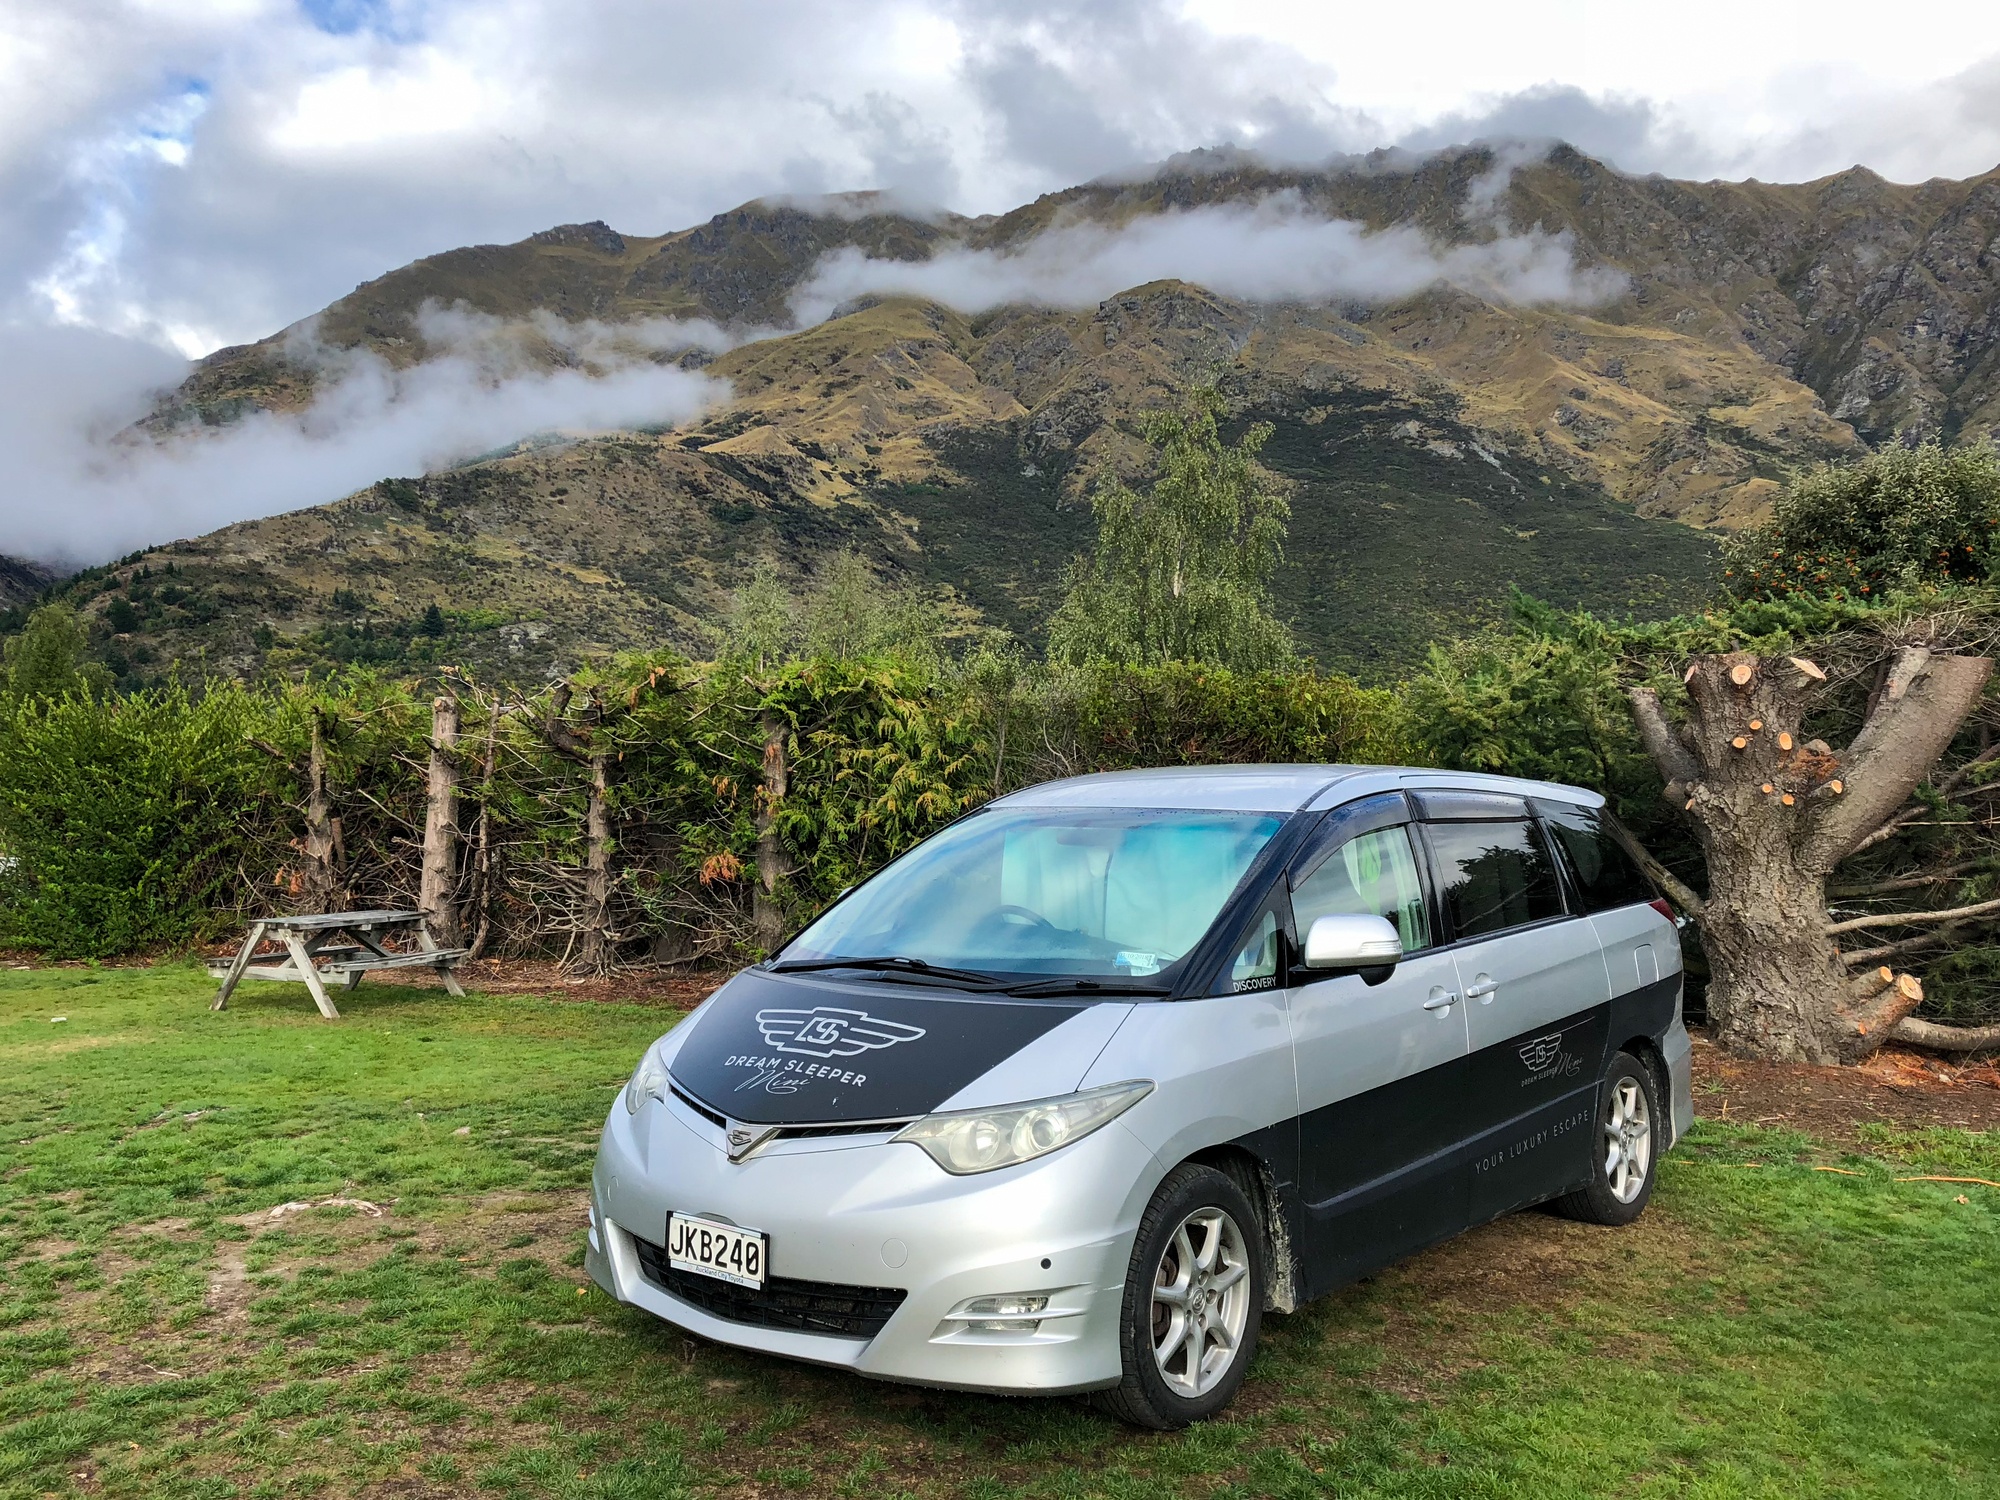 Planning a campervan road trip in New Zealand